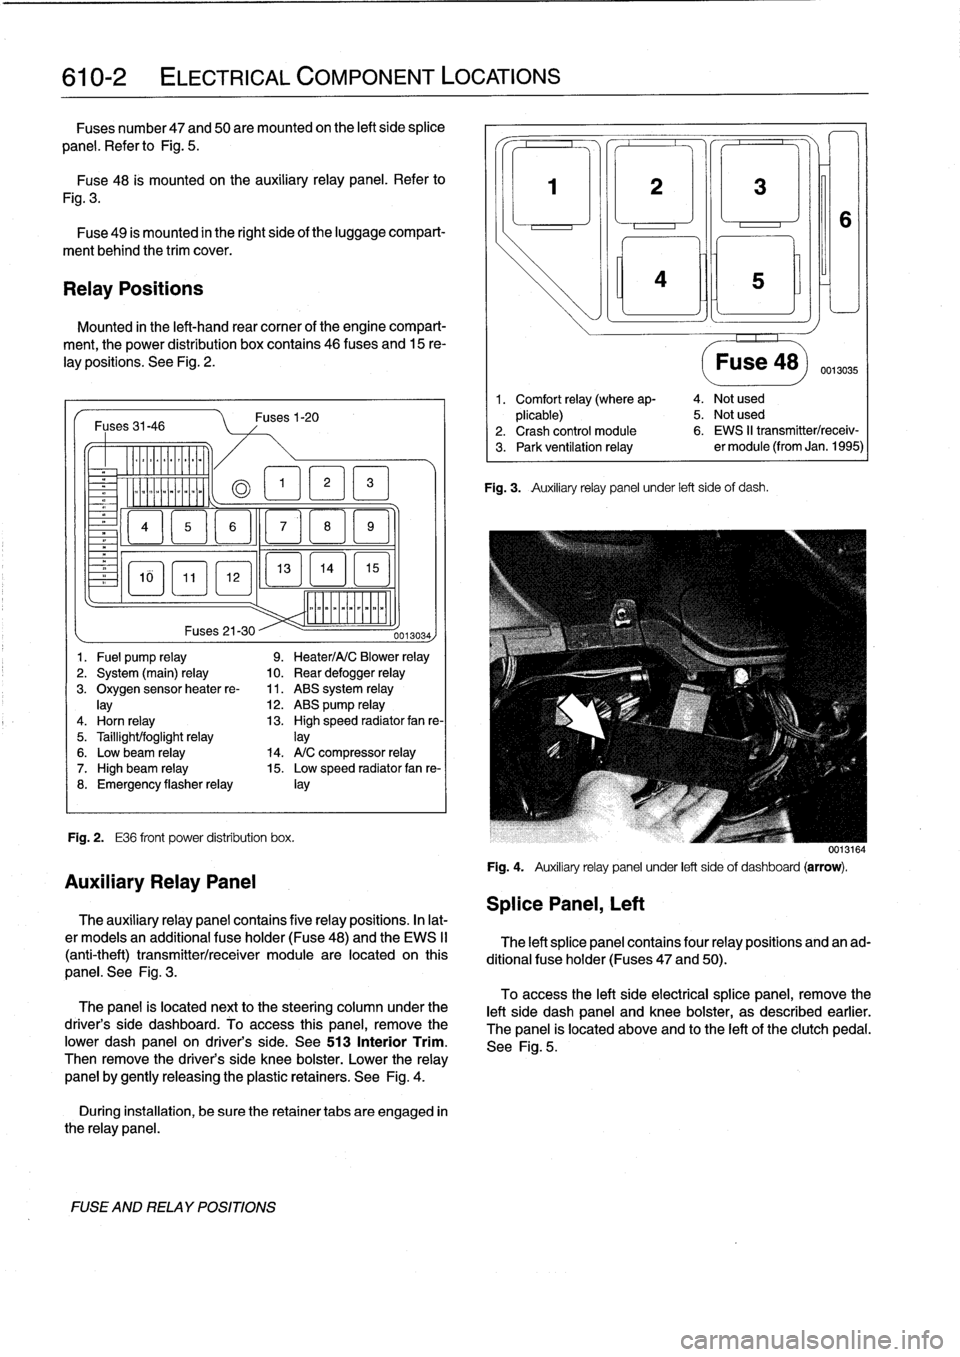 BMW 323i 1995 E36 Workshop Manual 
610-2

	

ELECTRICAL
COMPONENT
LOCATIONS

Fuses
number47
and
50are
mounted
on
the
left
side
splice

panel
.
Refer
lo
Fig
.
5
.

Fuse48
is
mounted
on
the
auxiliary
relay
panel
.
Refer
to

Fig
.
3
.

F